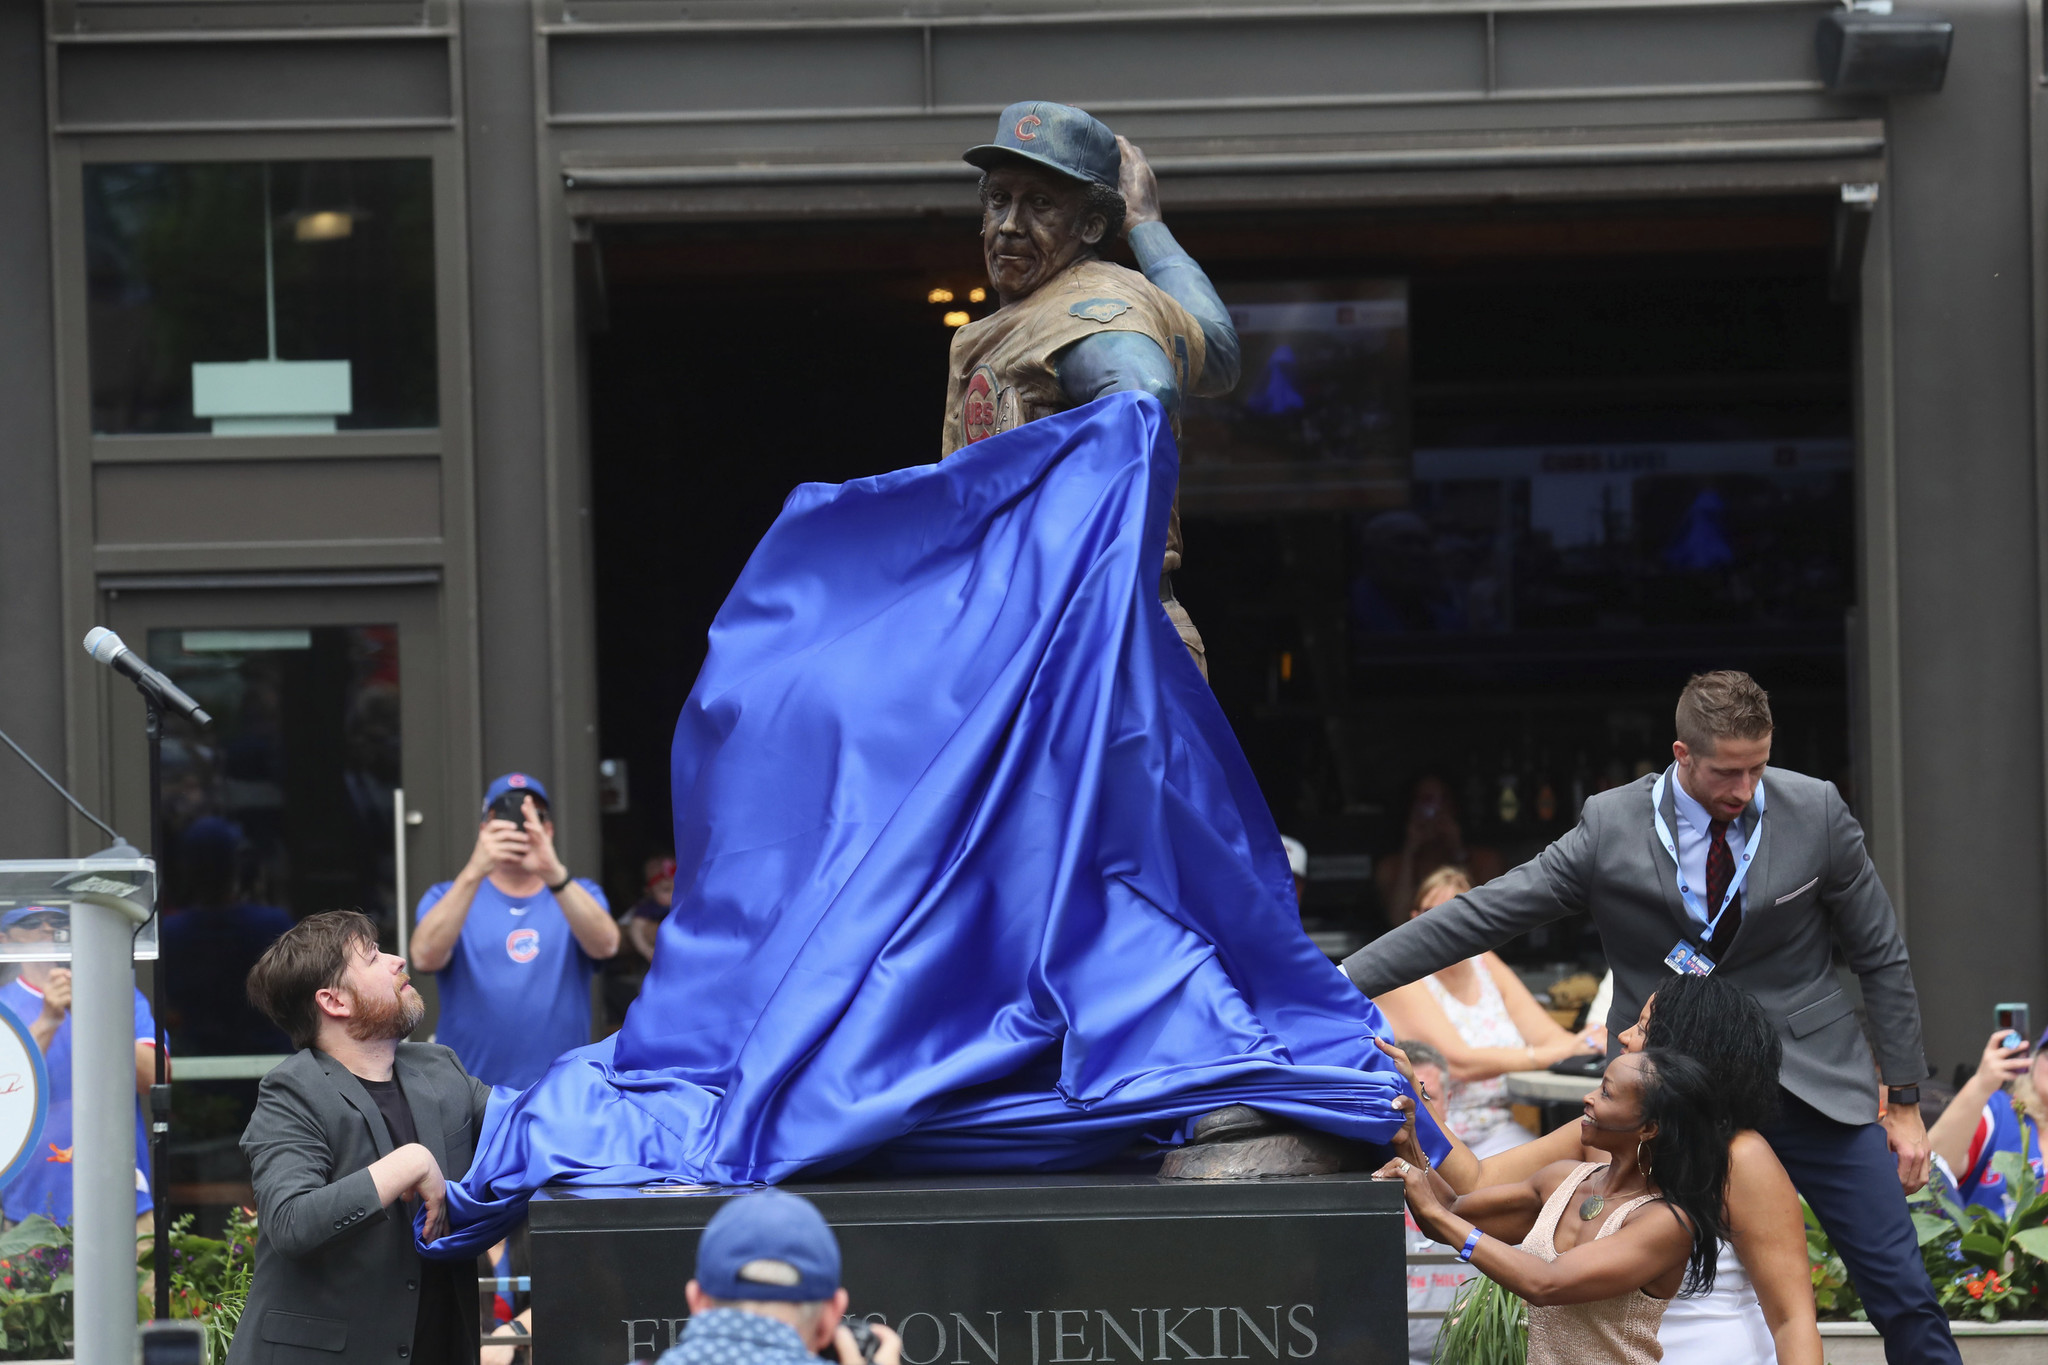 A pitch-perfect idea: Cubs to add statue of Fergie Jenkins to